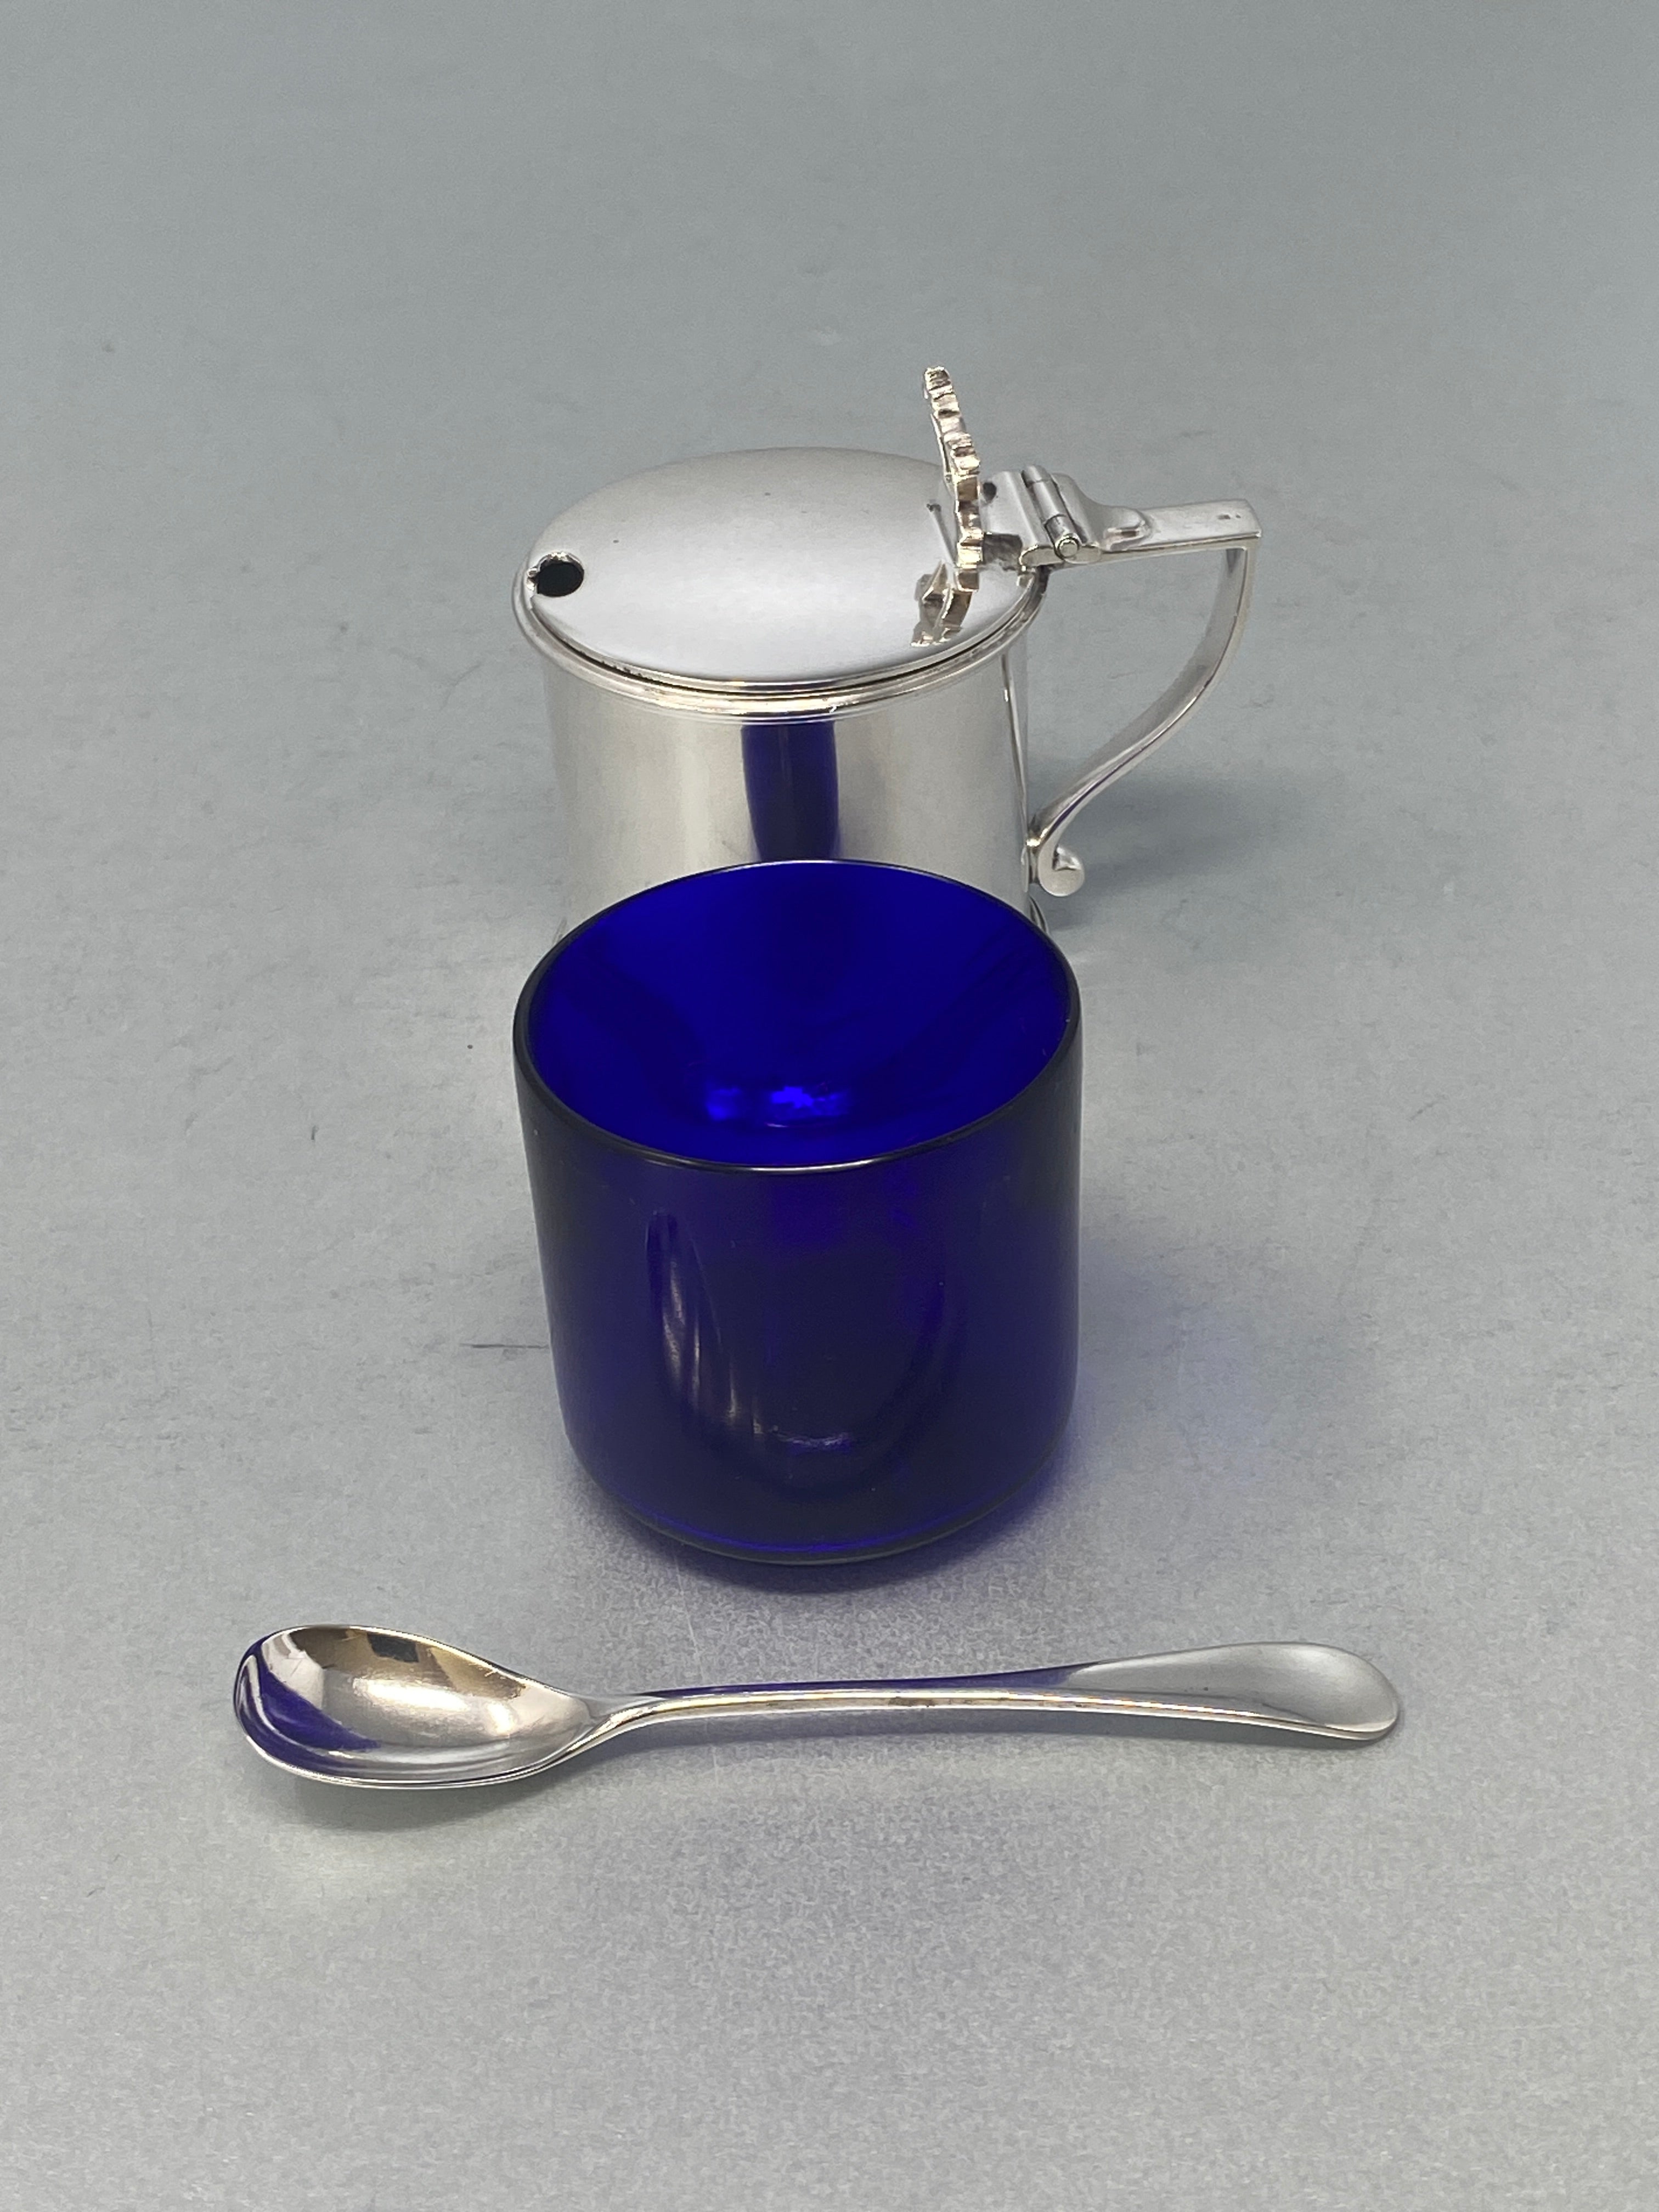 Antique Silver Plated Mustard Pot and Spoon with Bristol Blue Glass Liner